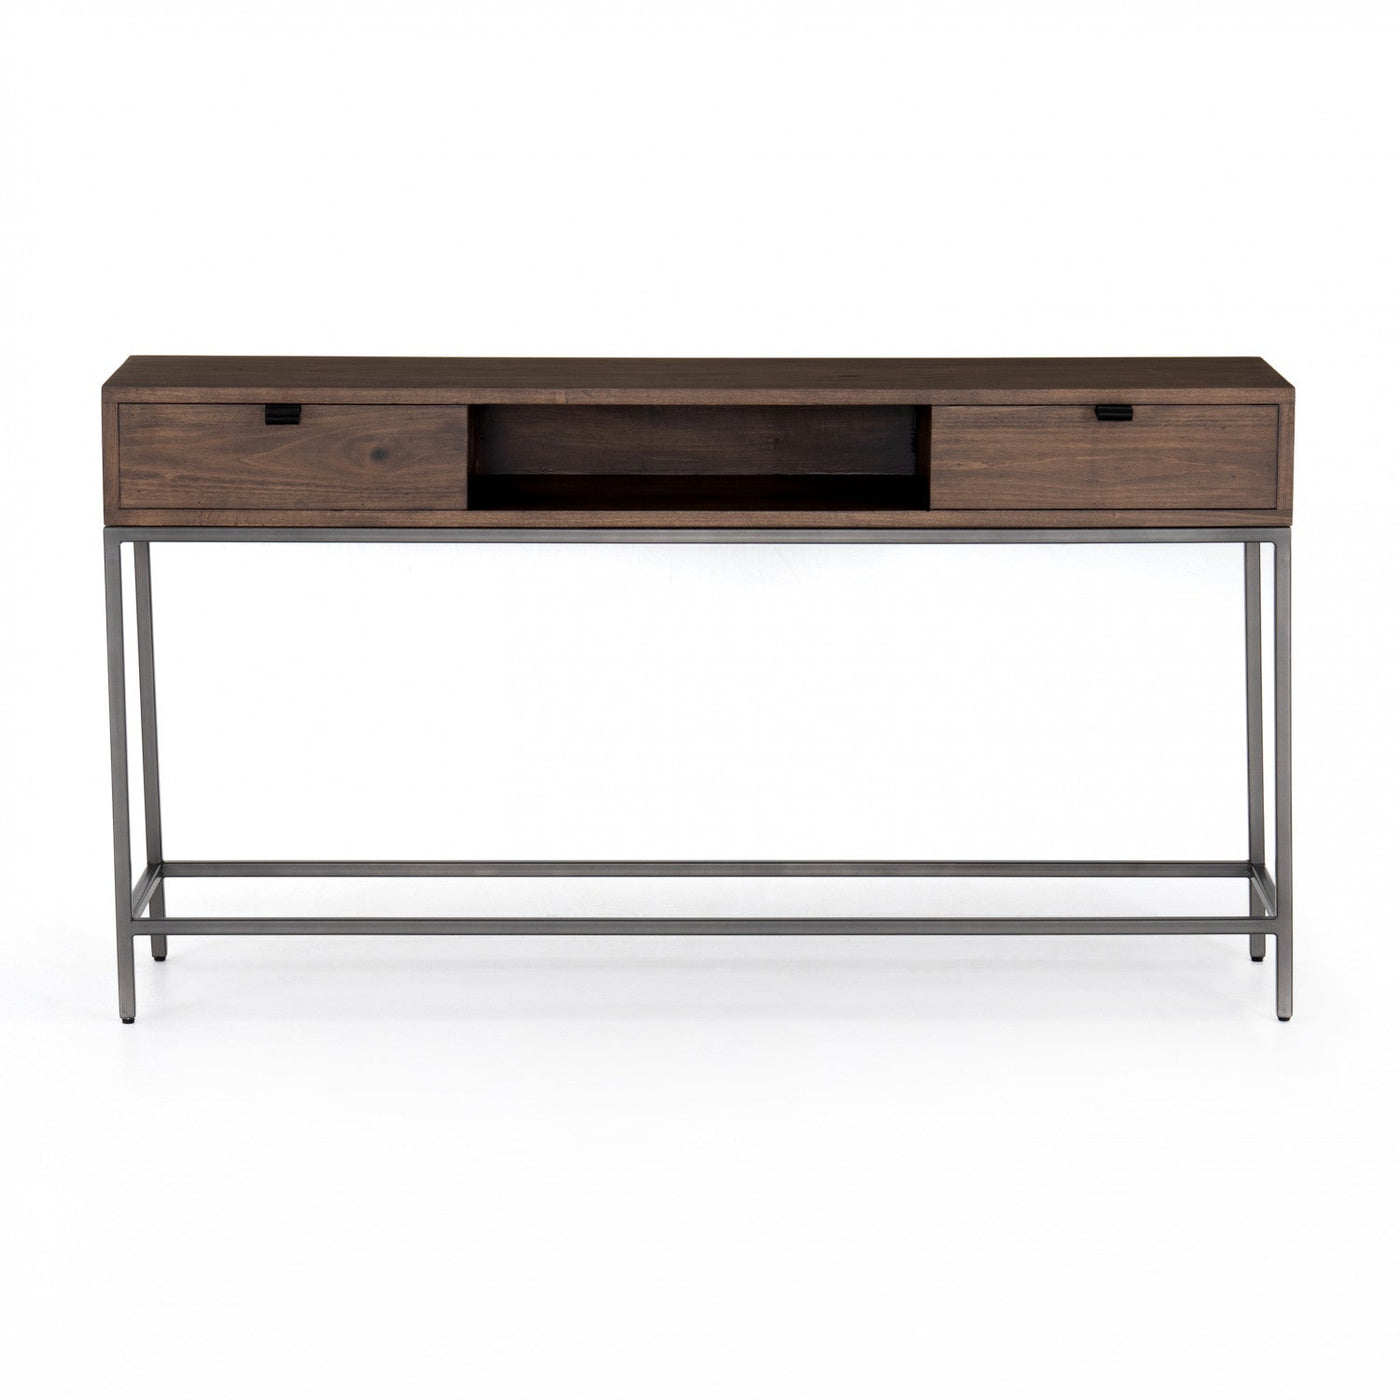 MARCUS CONSOLE TABLE